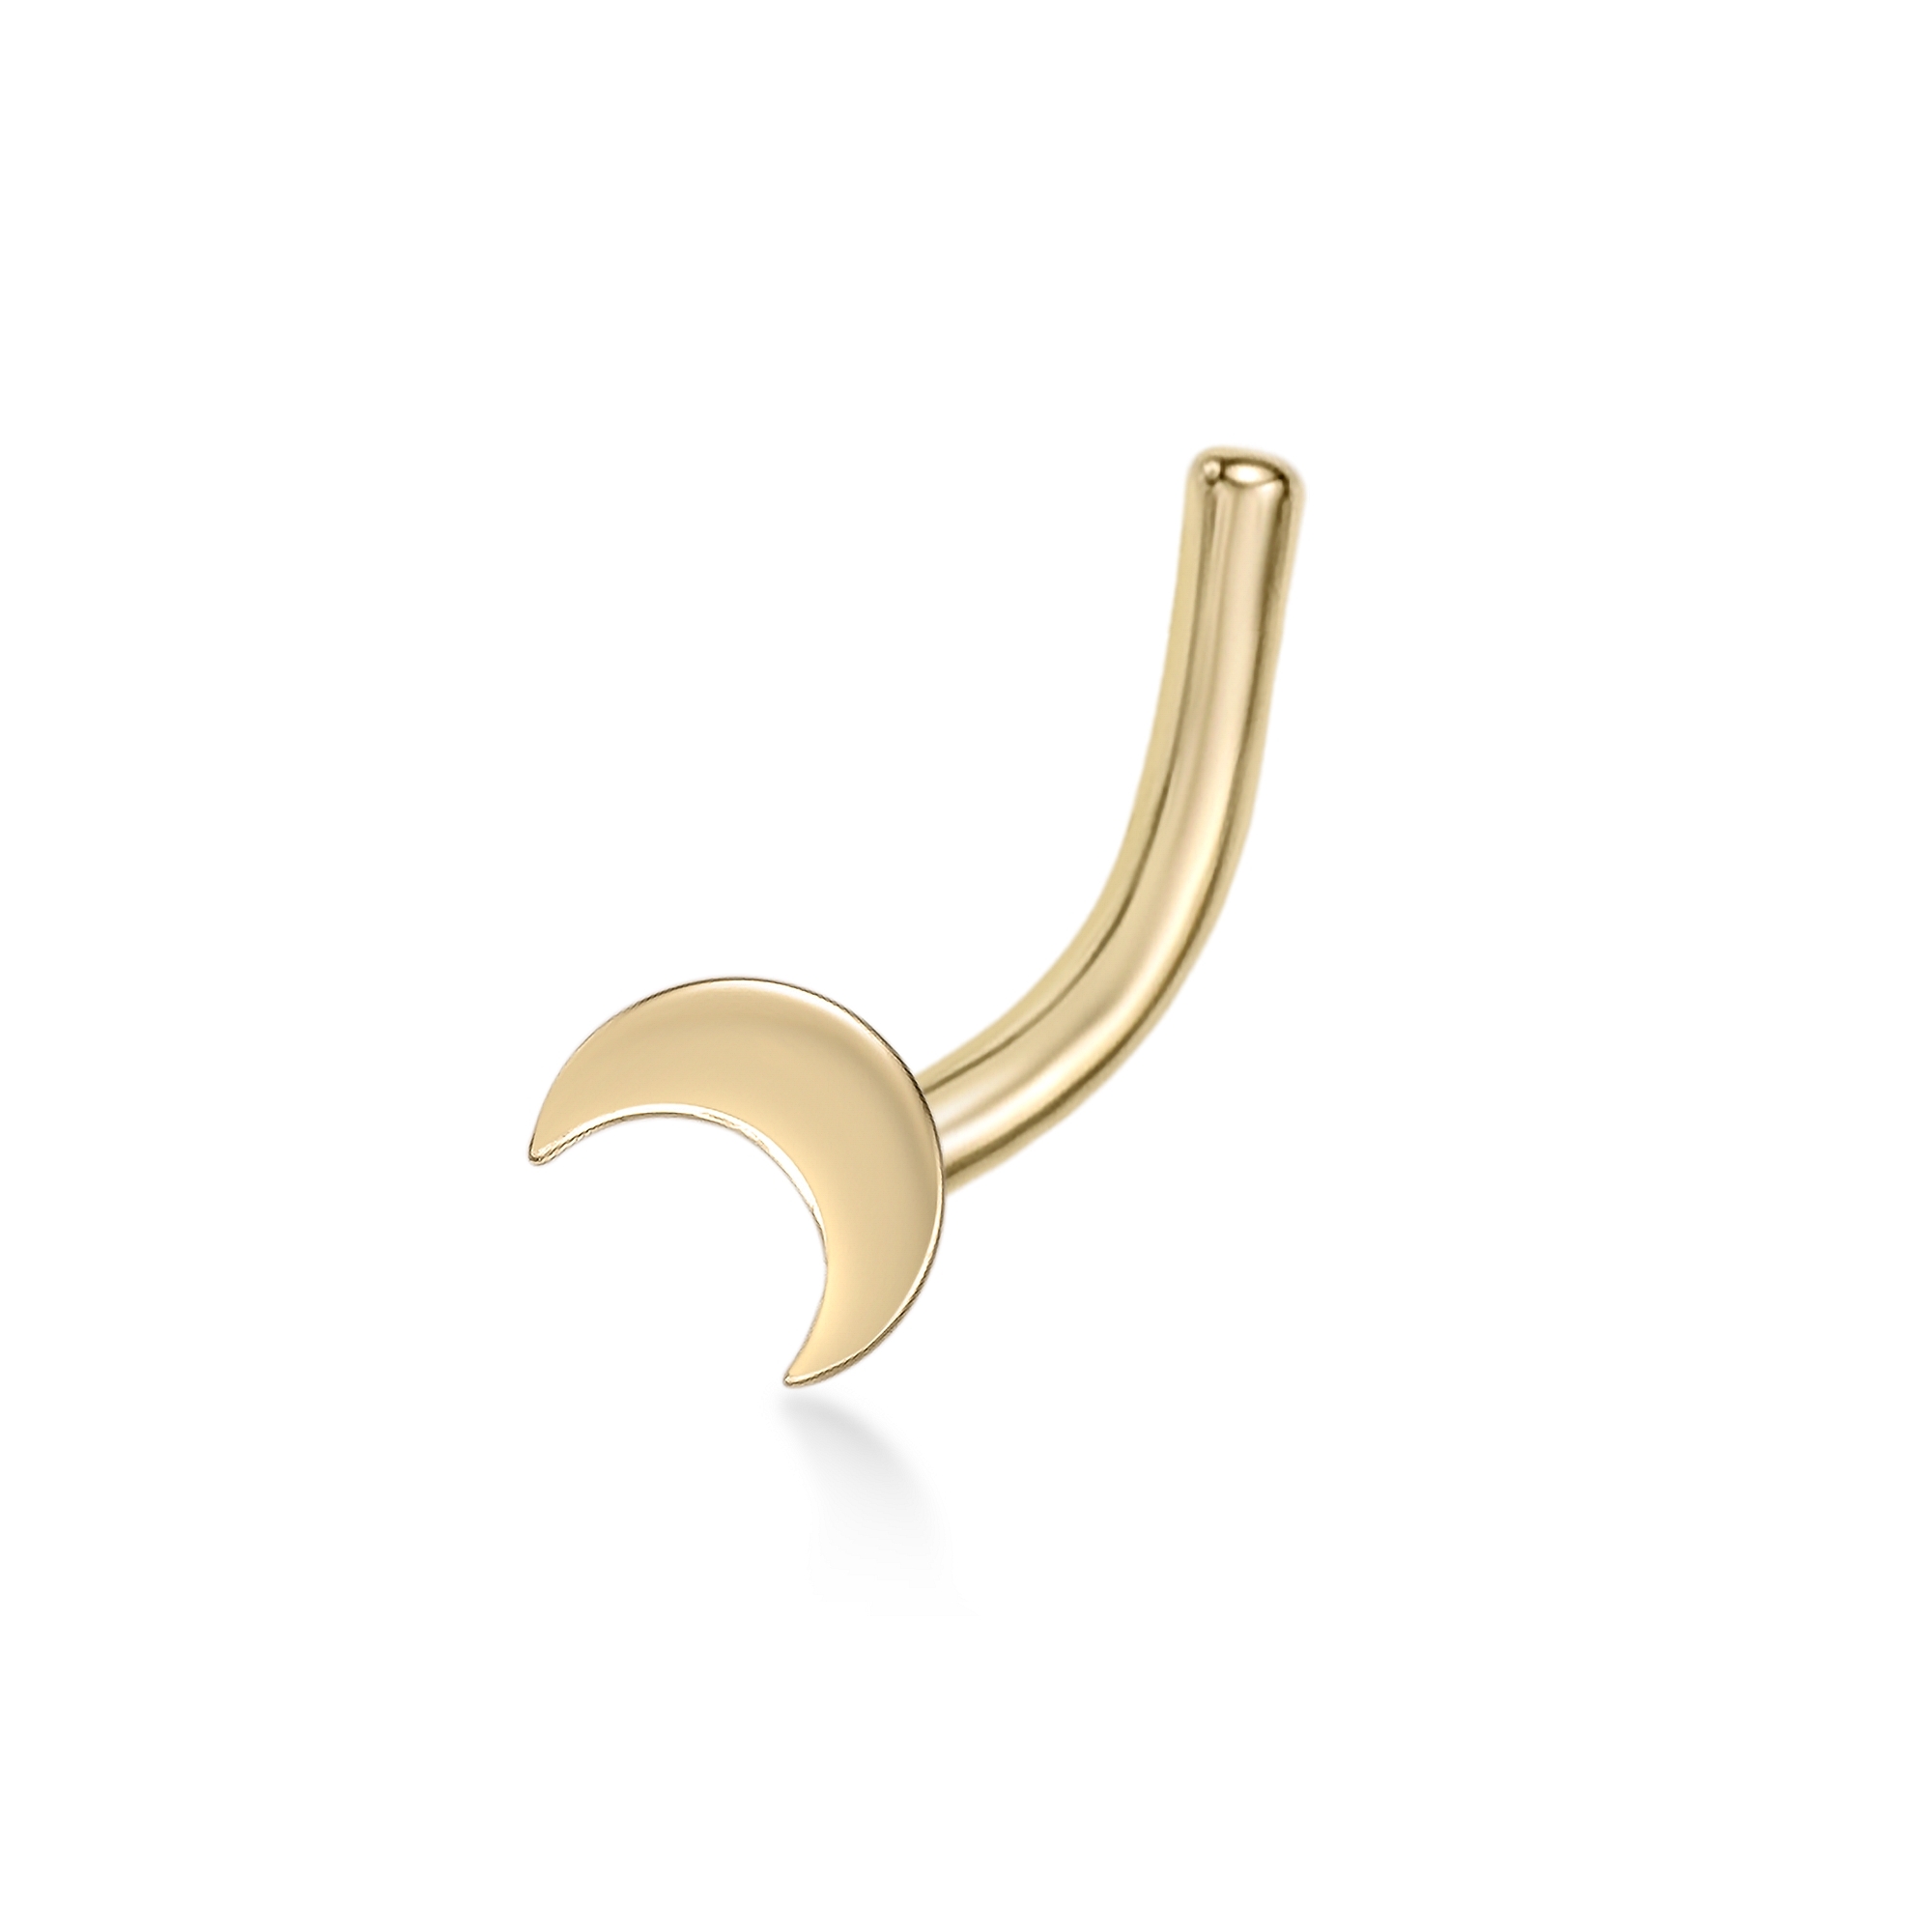 Lavari Jewelers Women's 3.5 MM Moon Curved Nose Ring, 14K Yellow Gold, 20 Gauge